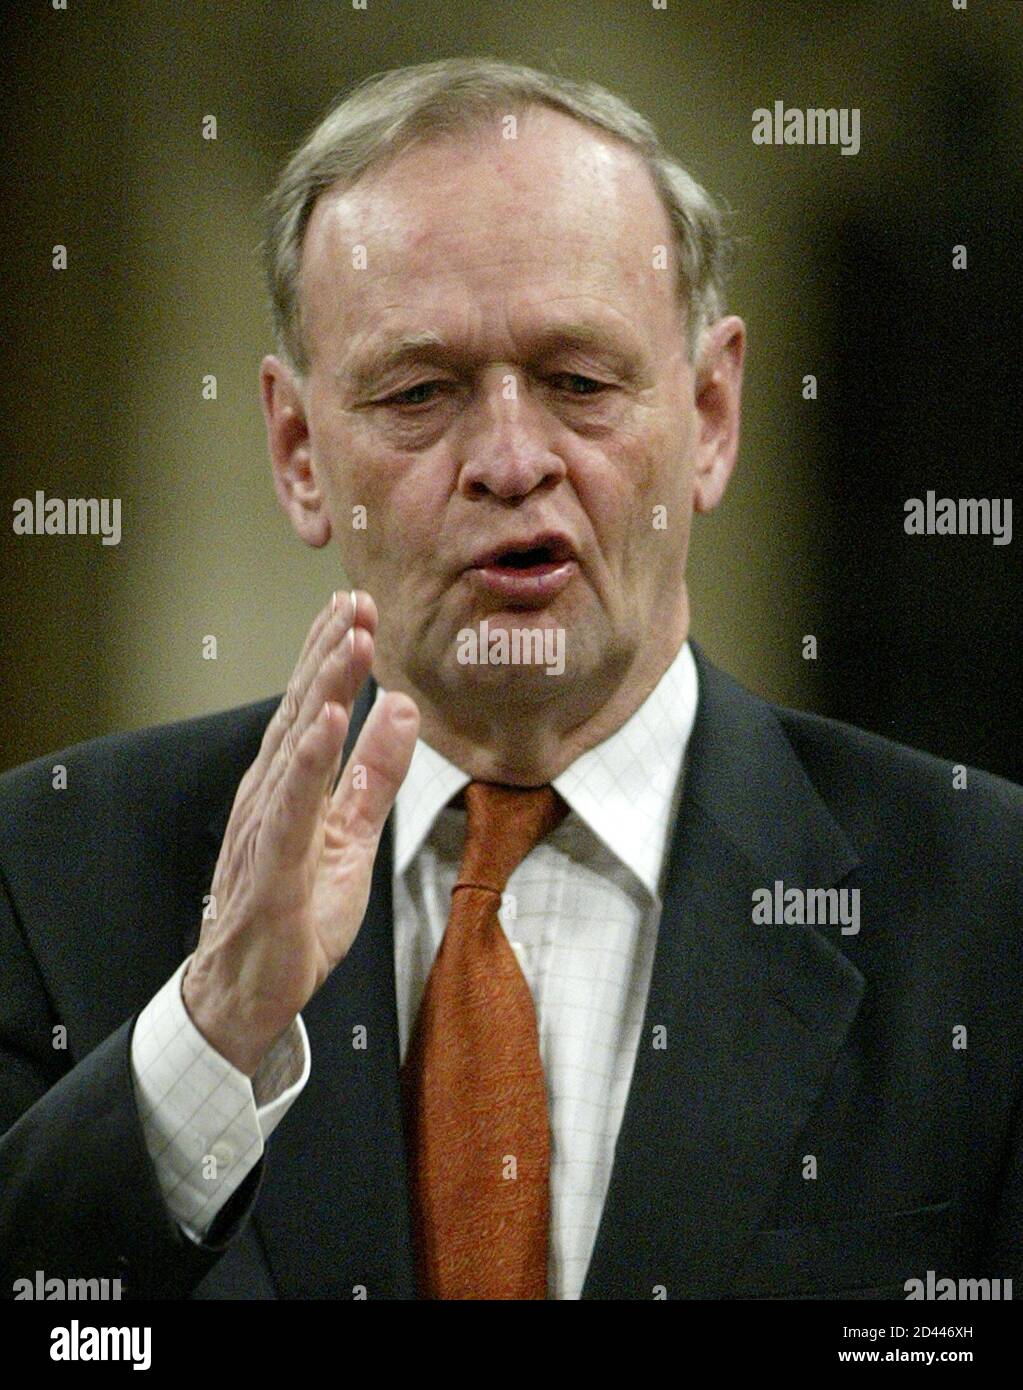 Canadian Prime Minister Jean Chretien speaks in the House of Commons, in Ottawa, March 25, 2003. Chretien continues to face questions about Canada's stance to not get involved in the war in Iraq. REUTERS/Jim Young  JY Stock Photo